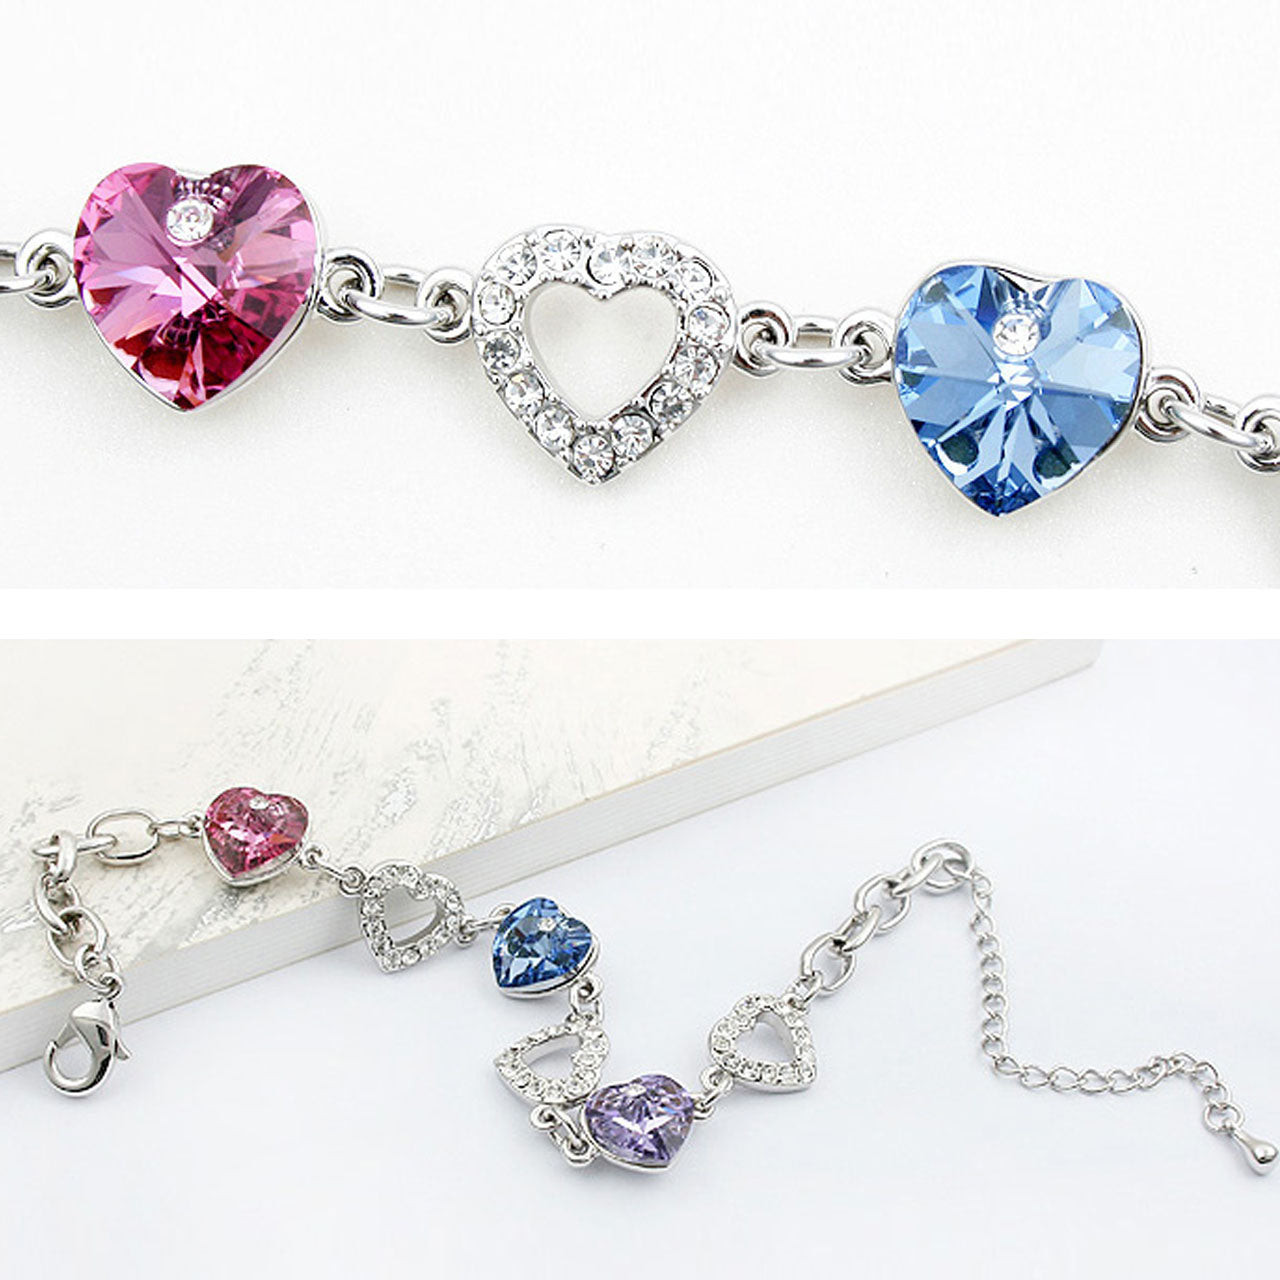 Buy KIAYRA Pink Flower Swarovski Crystal Bracelets with Beautiful Unique  Design in Silver Polish for Woman/Girls. at Amazon.in